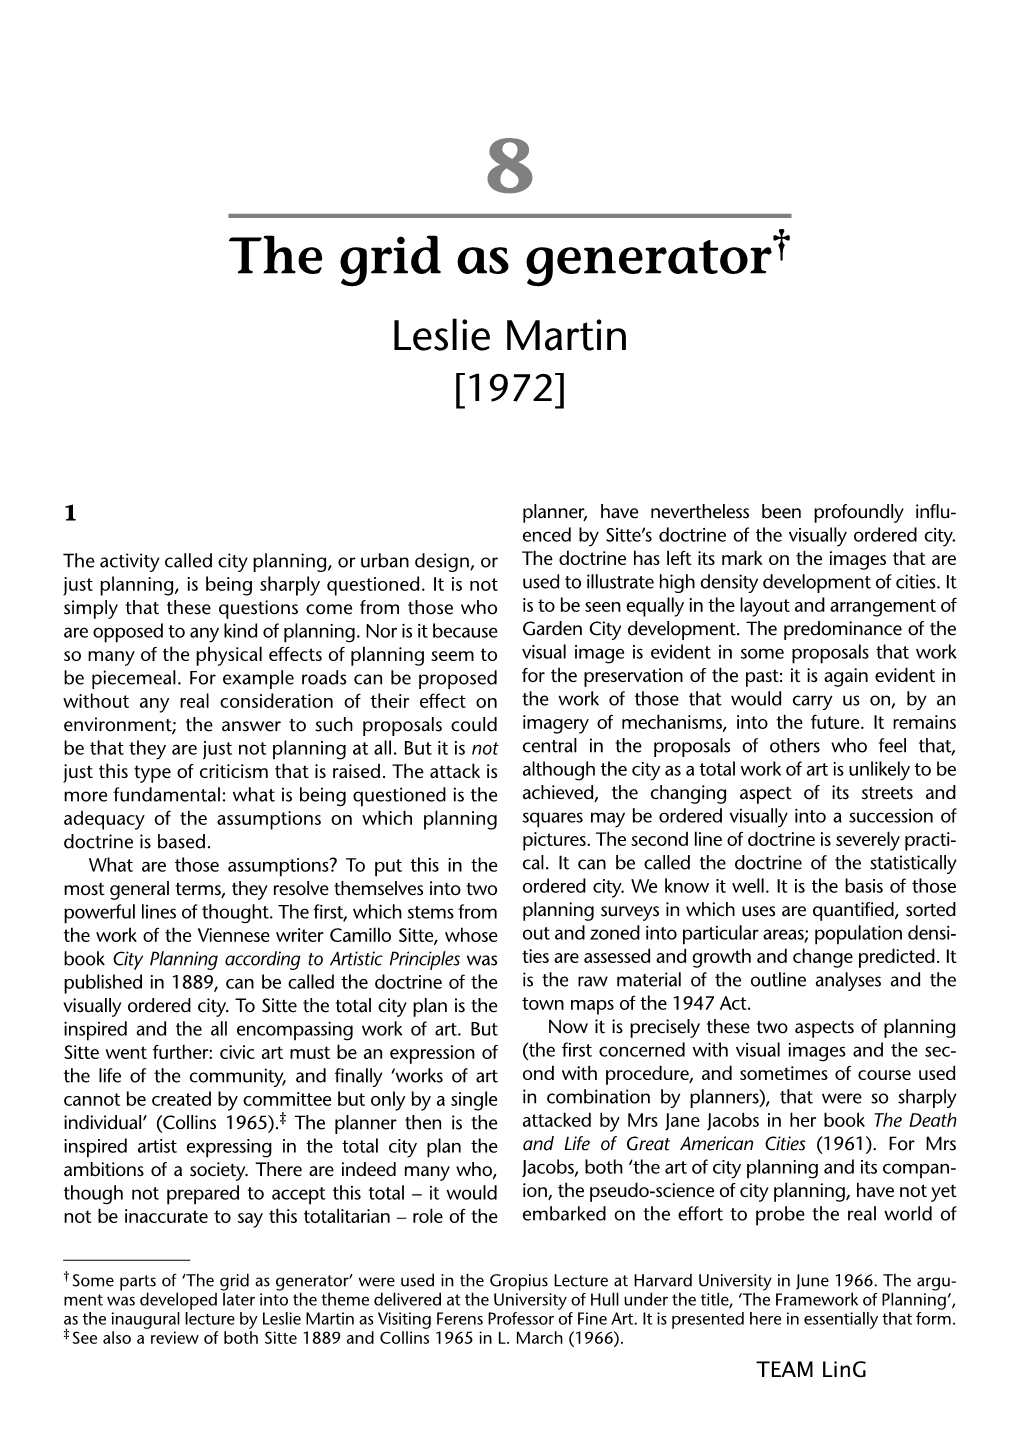 The Grid As Generator, by Leslie Martin 1972